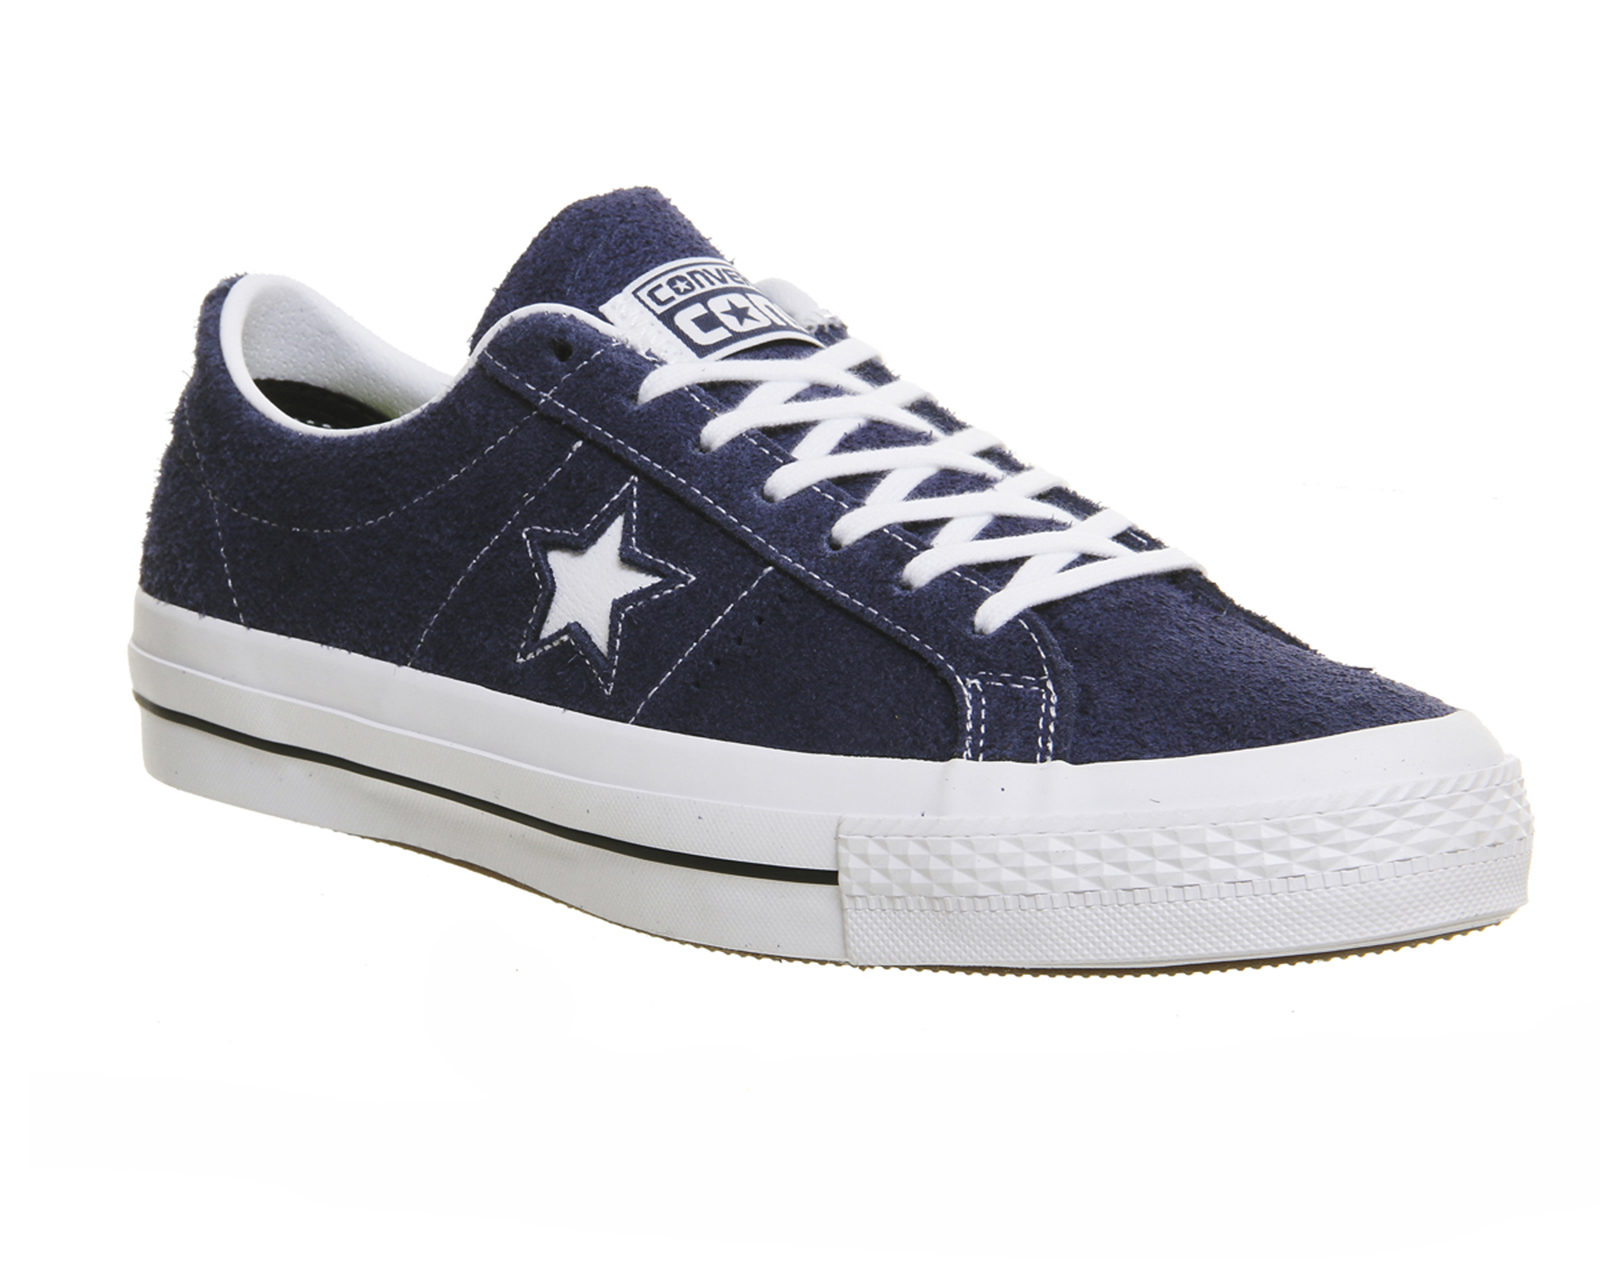 Converse One Star Skate Navy White Gum Hairy Suede - His trainers